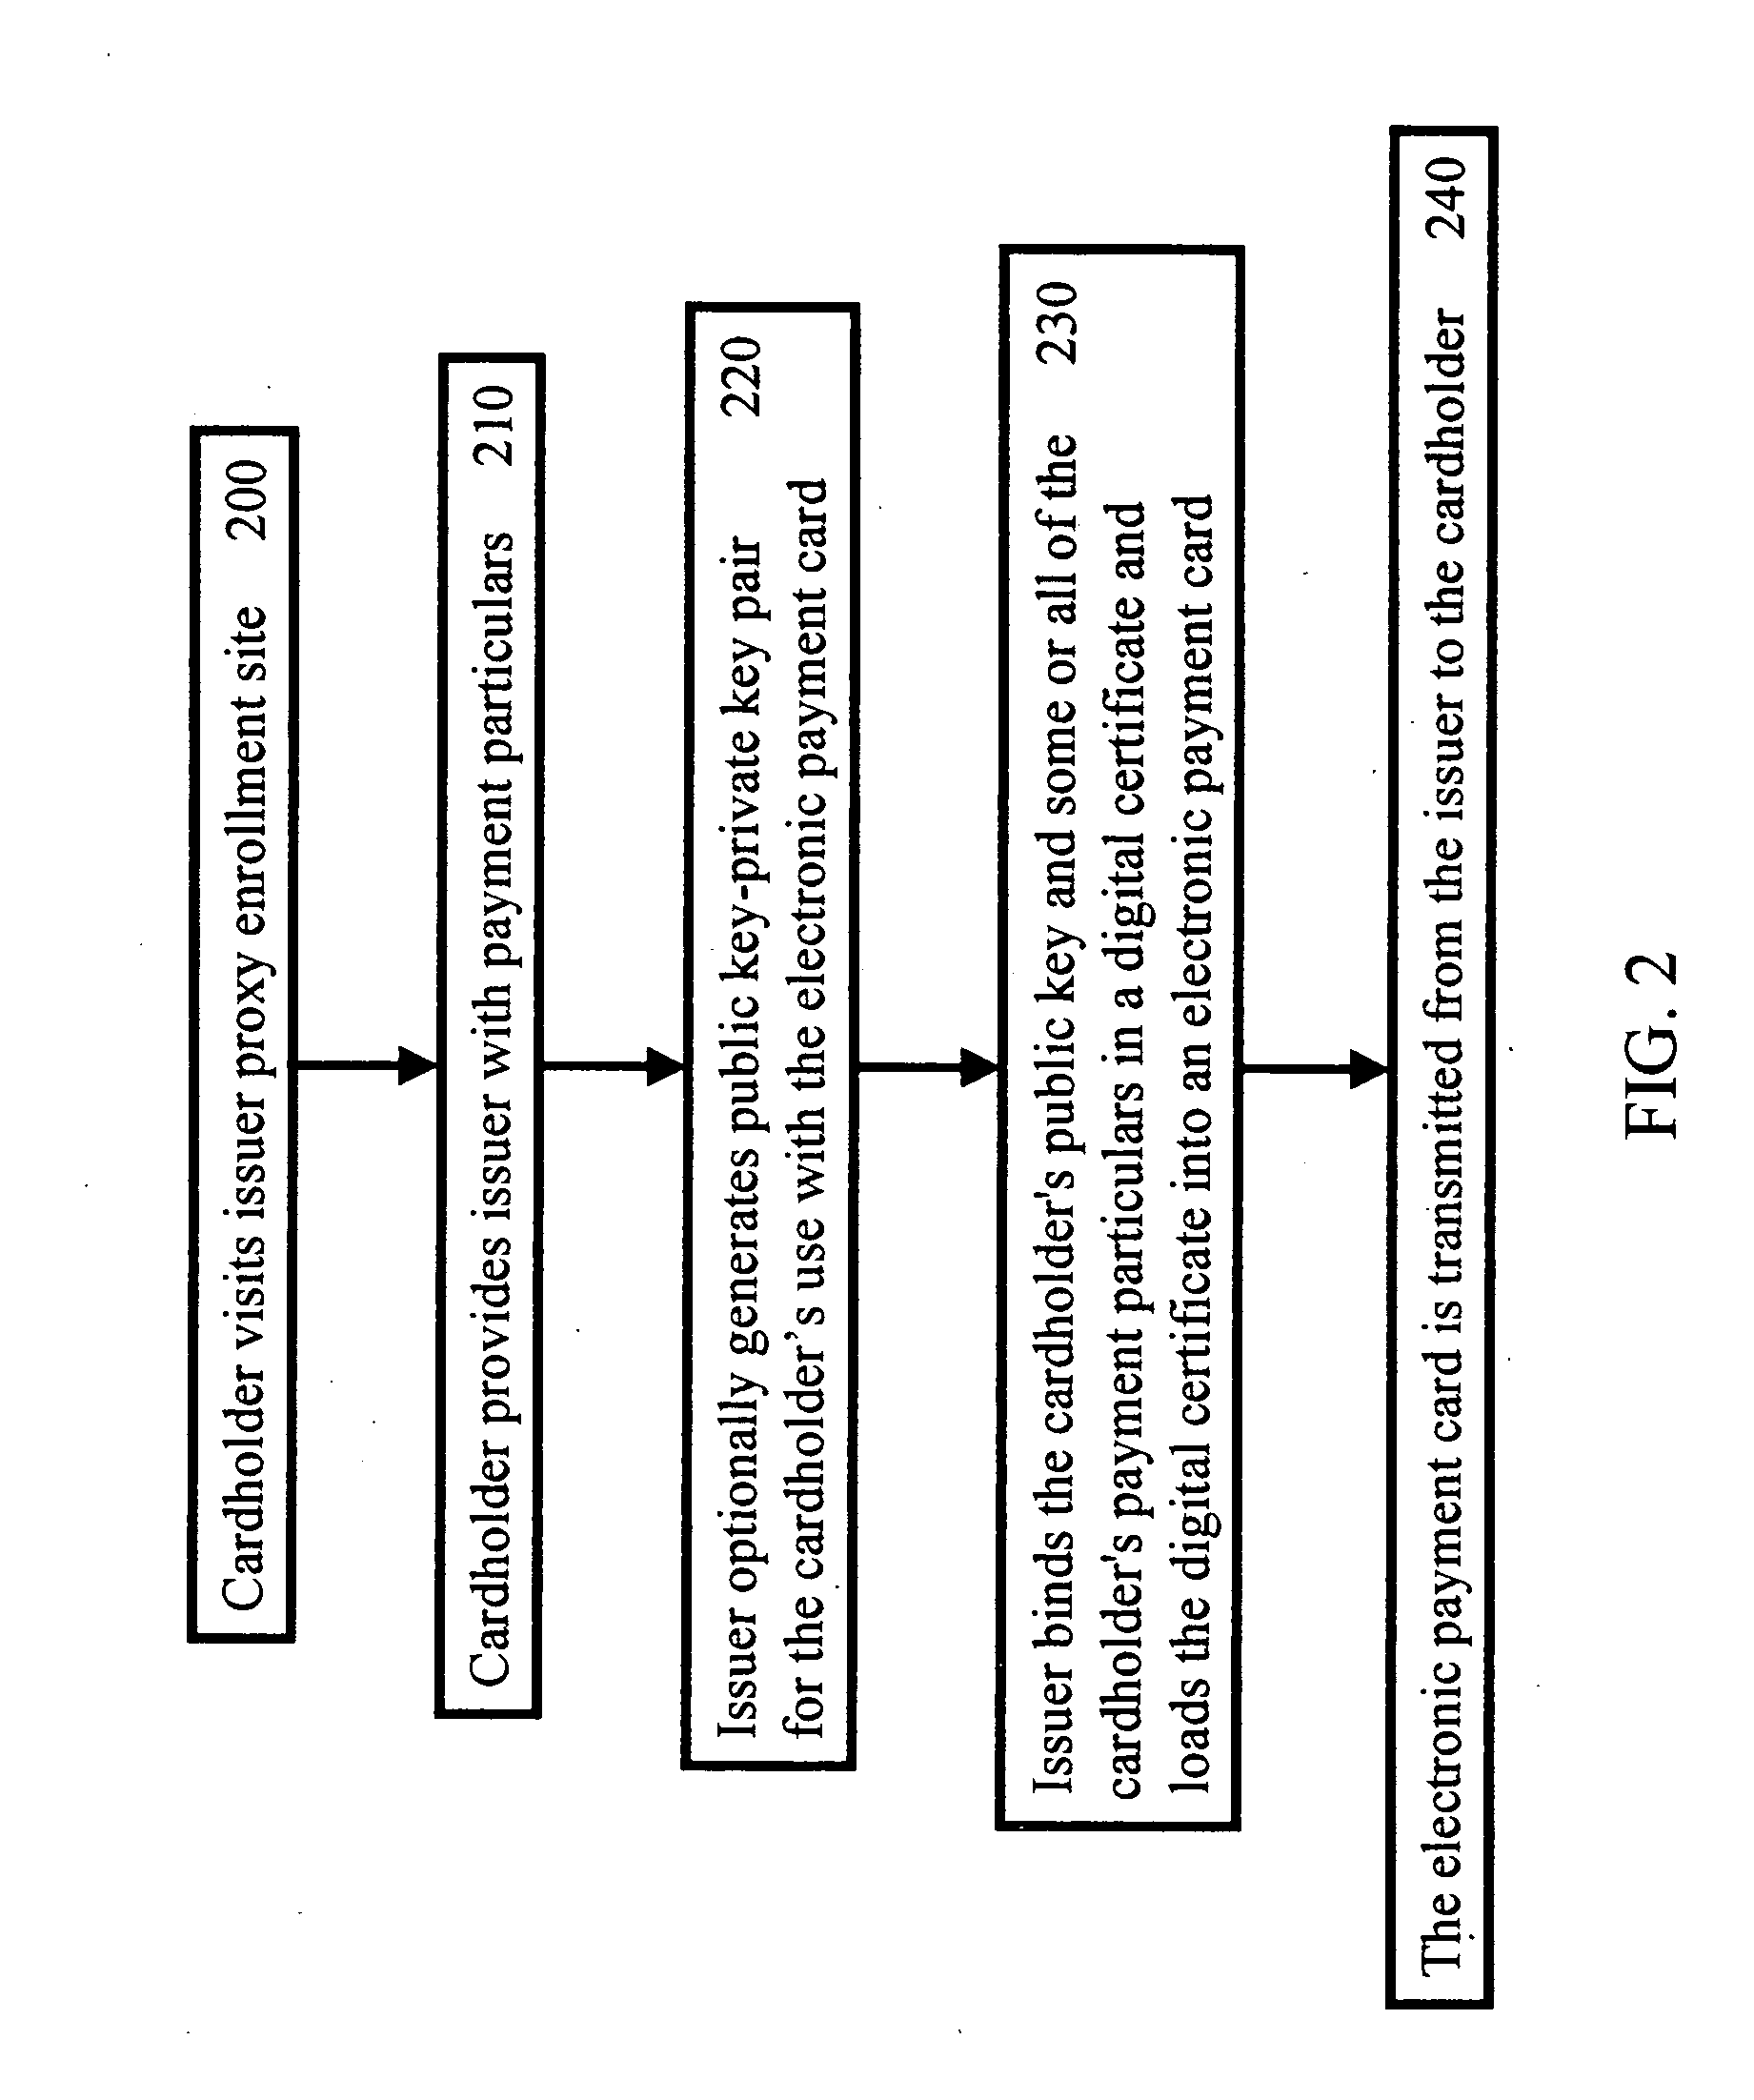 Method and system for secure authenticated payment on a computer network